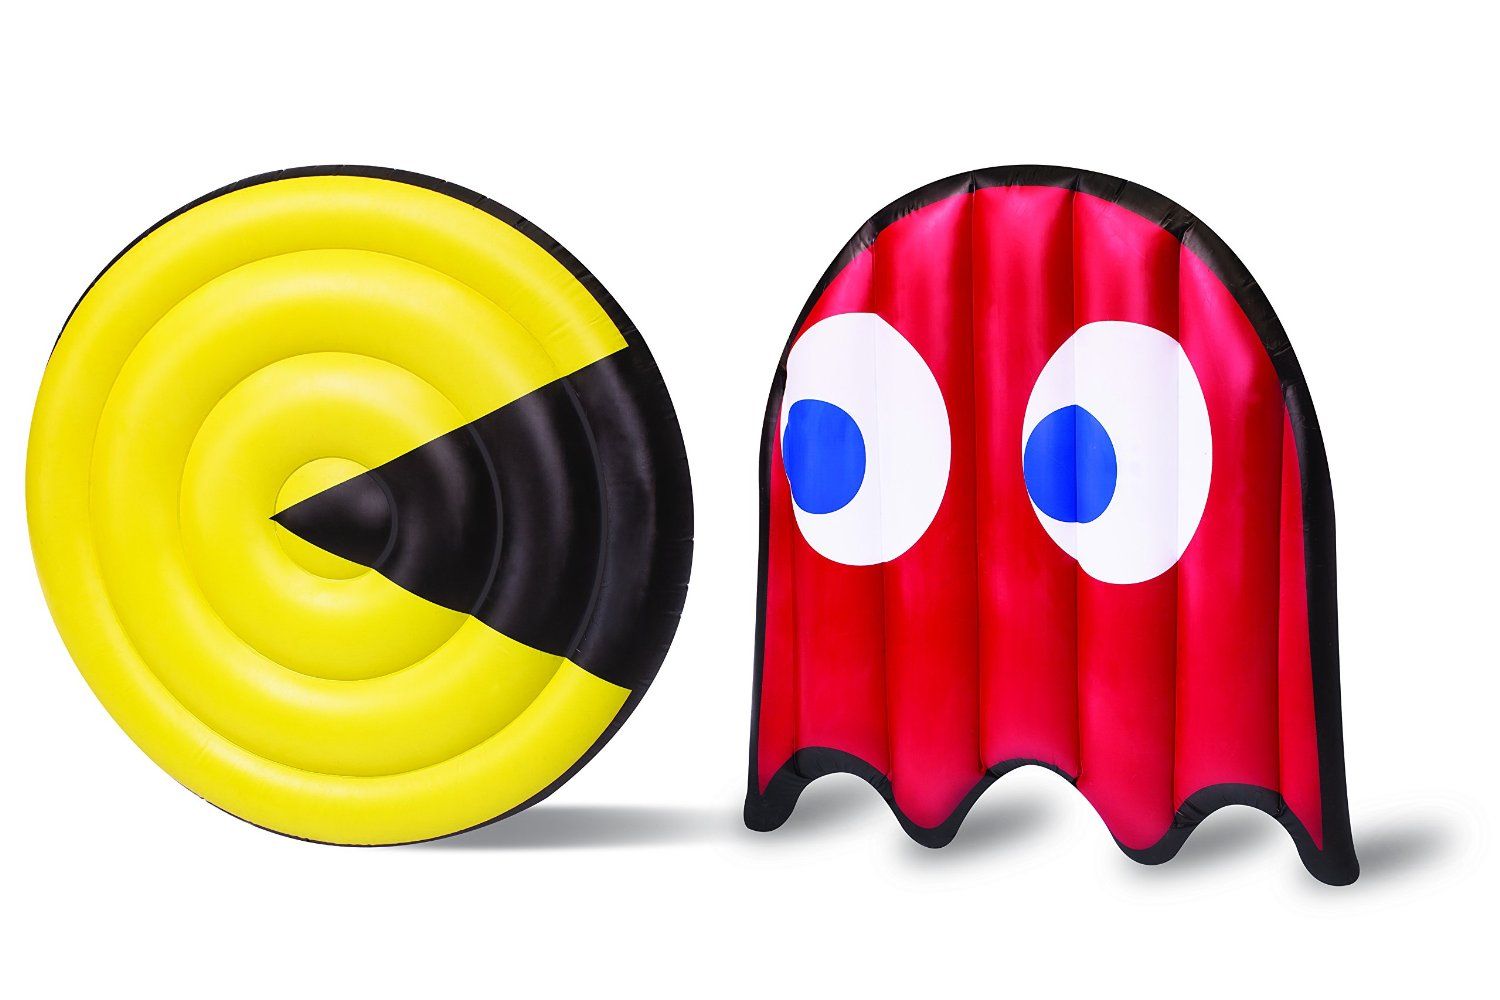 Cool geeky pool floats: Pac Man and Ghost